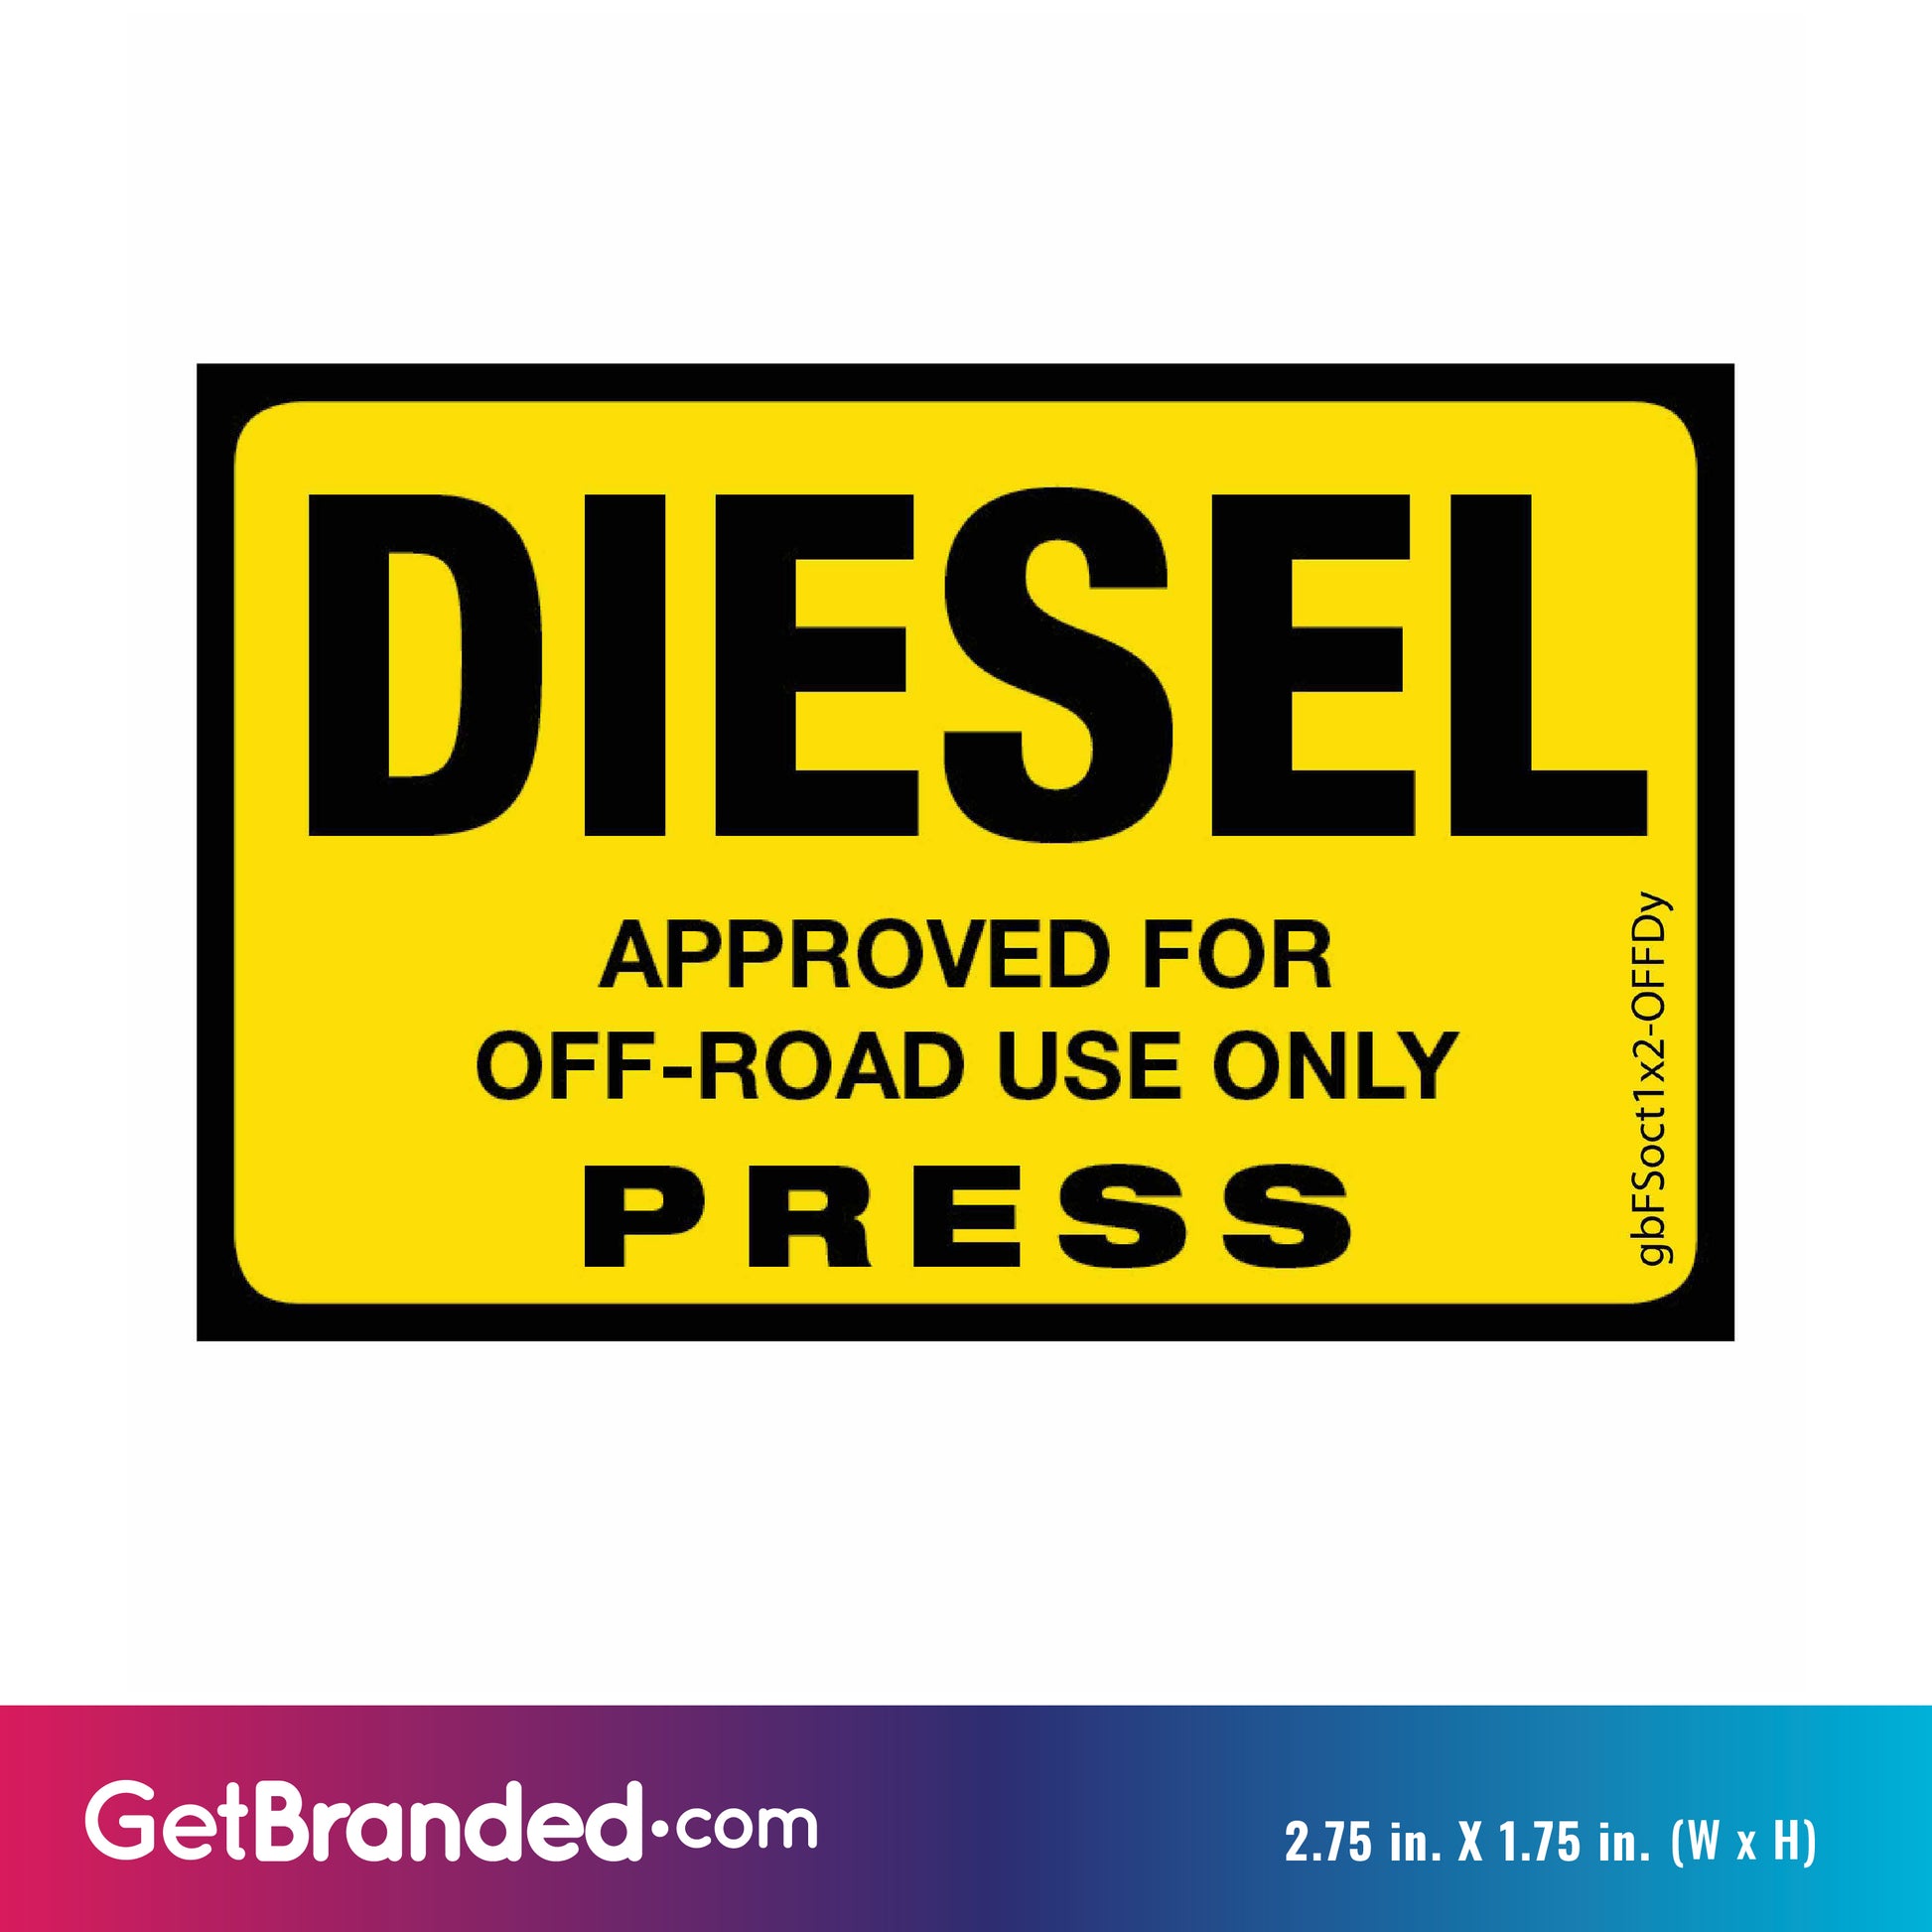 Diesel (Off Road) Press Octane Rating Decal, Yellow size guide.